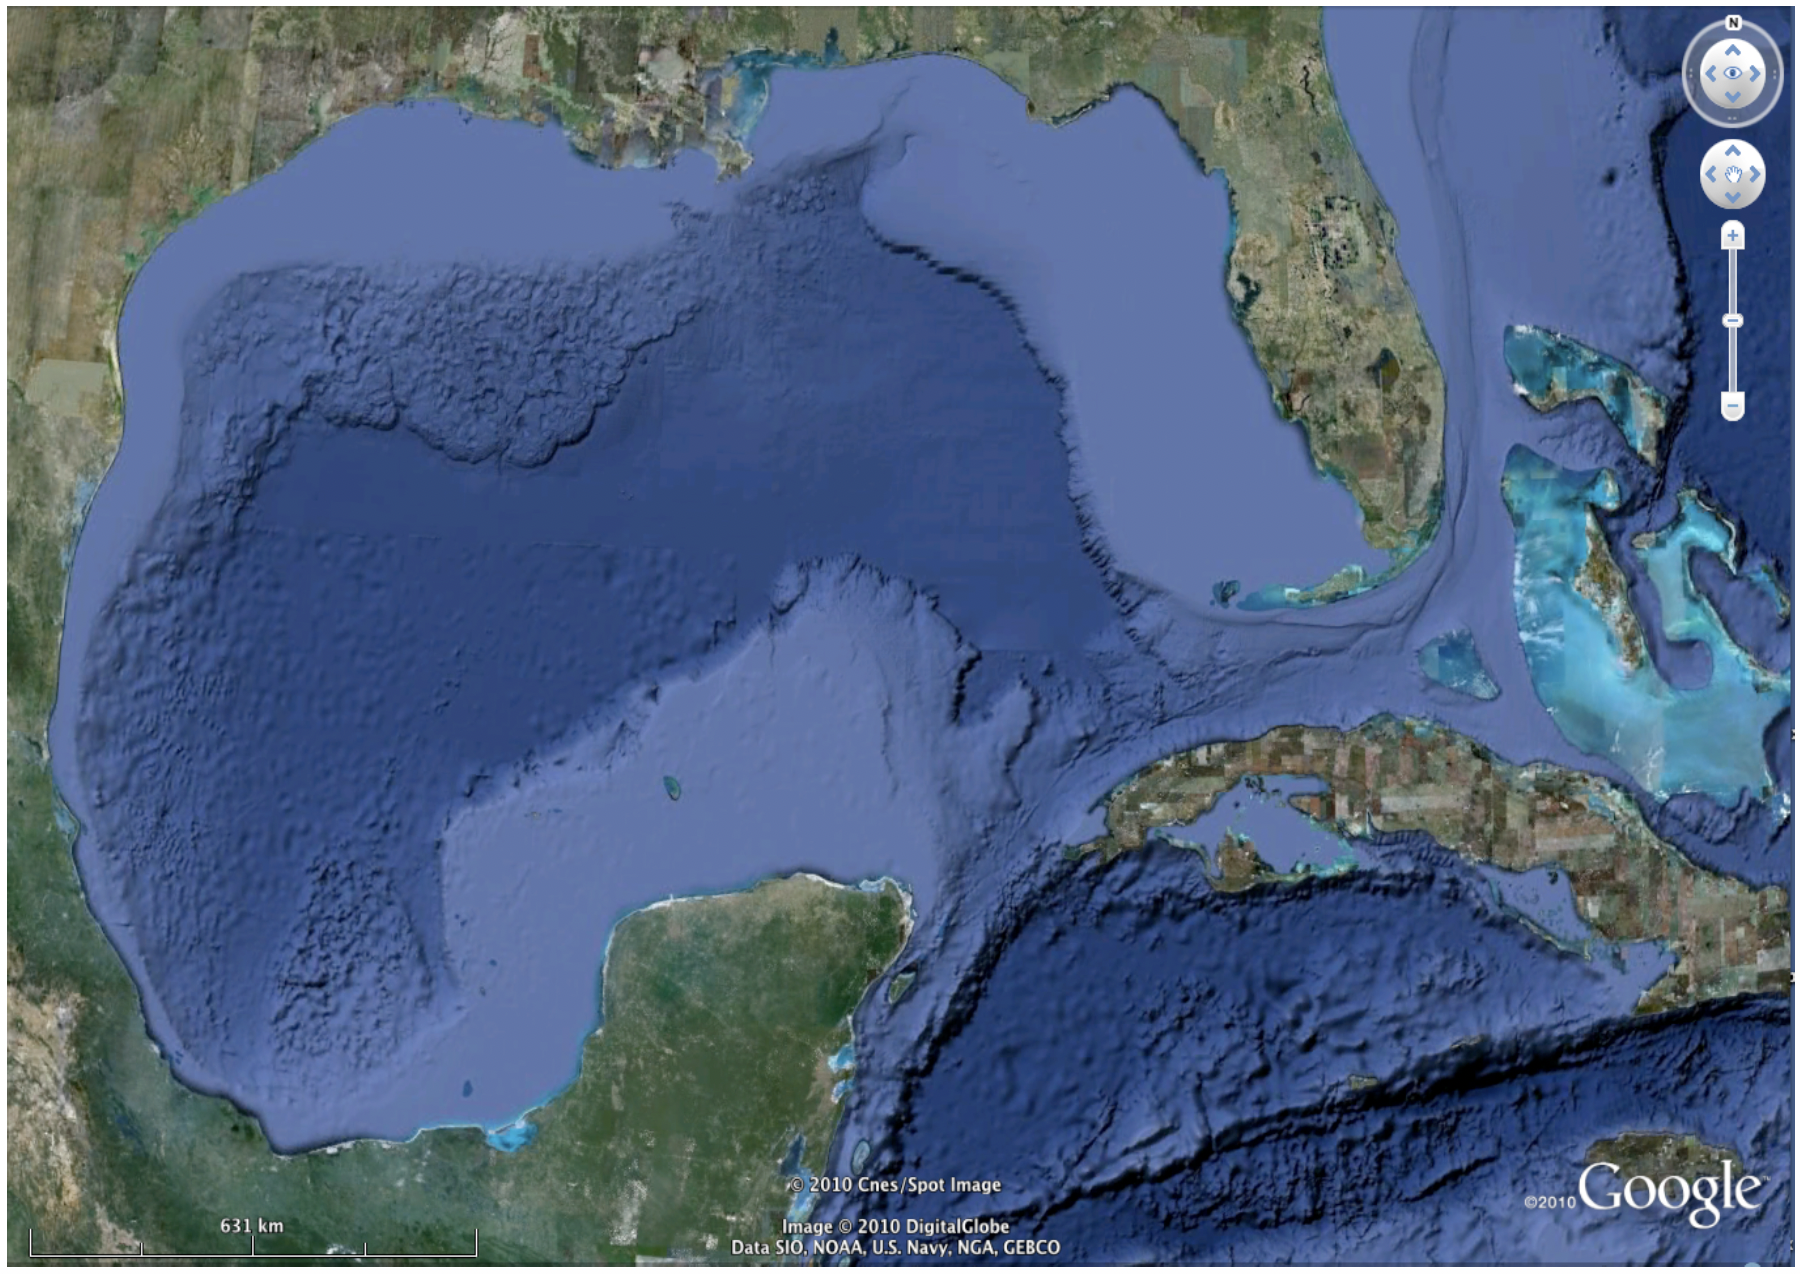 Satellite image of the Gulf of Mexico showing continental shelves, slopes, and escarpments, as well as the deepwater zone in the center.